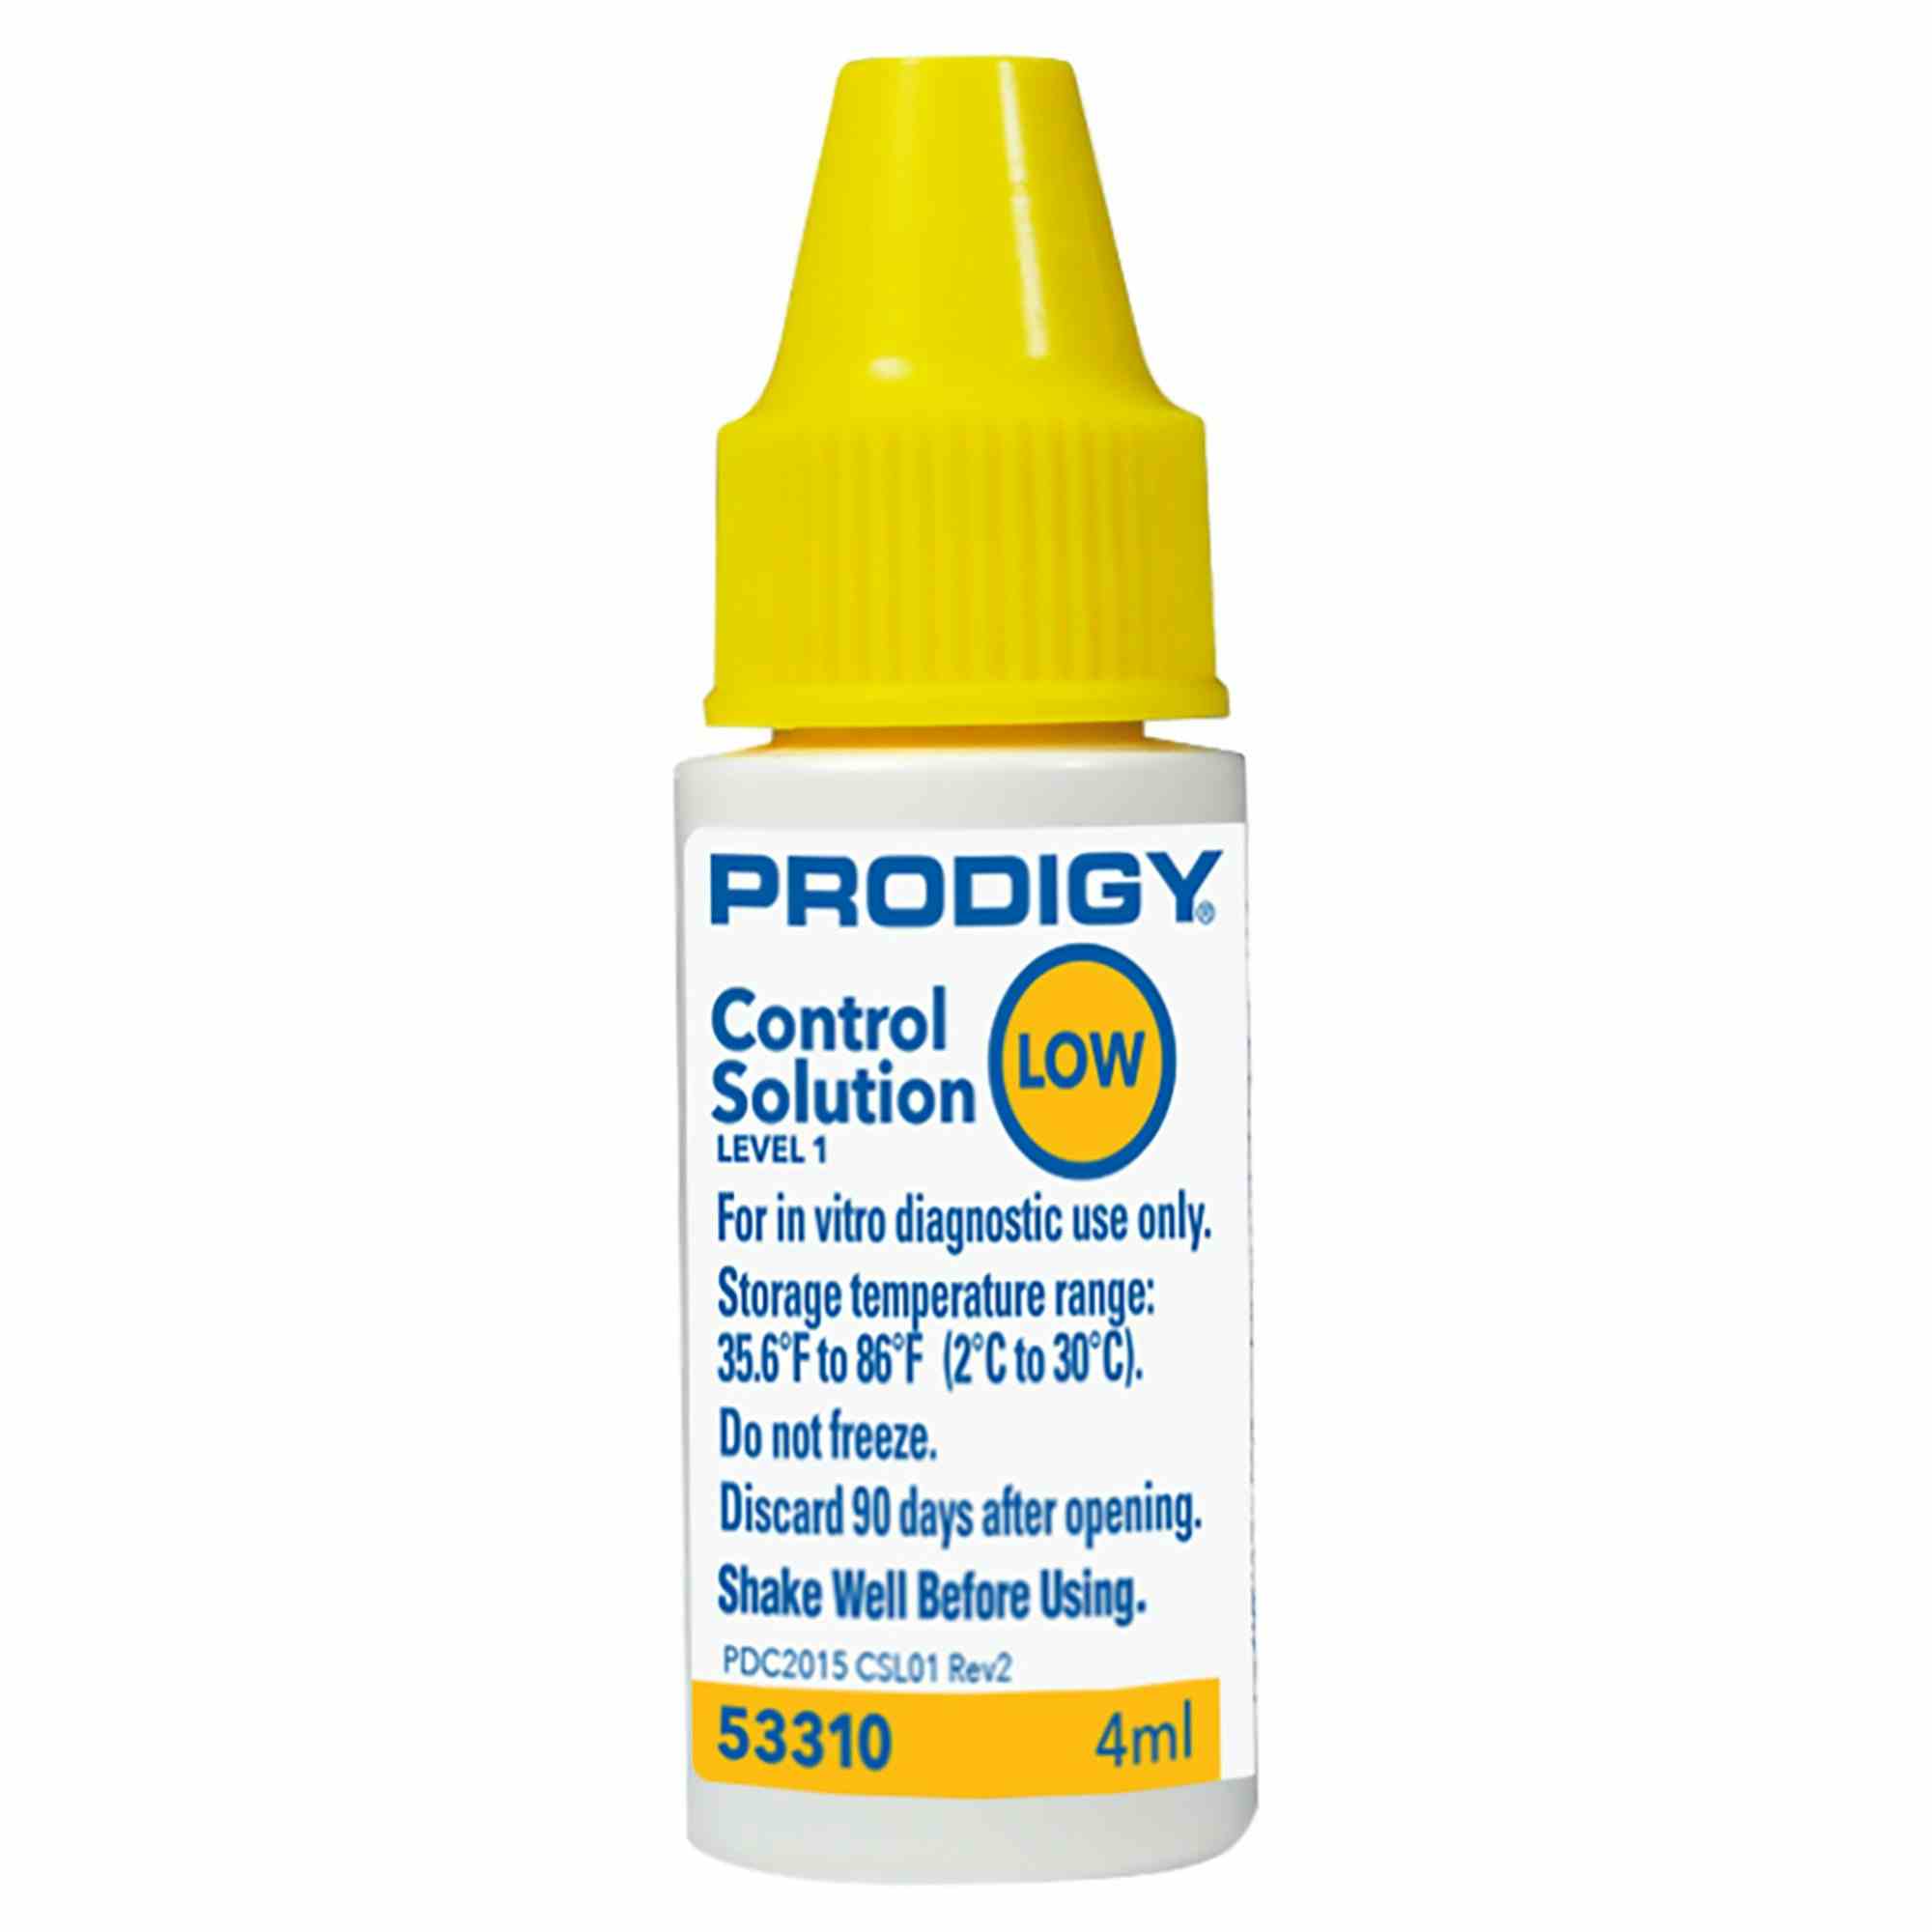 Prodigy Control Solution Blood Glucose Testing, 4 mL Low Level, 53310, 1 Each